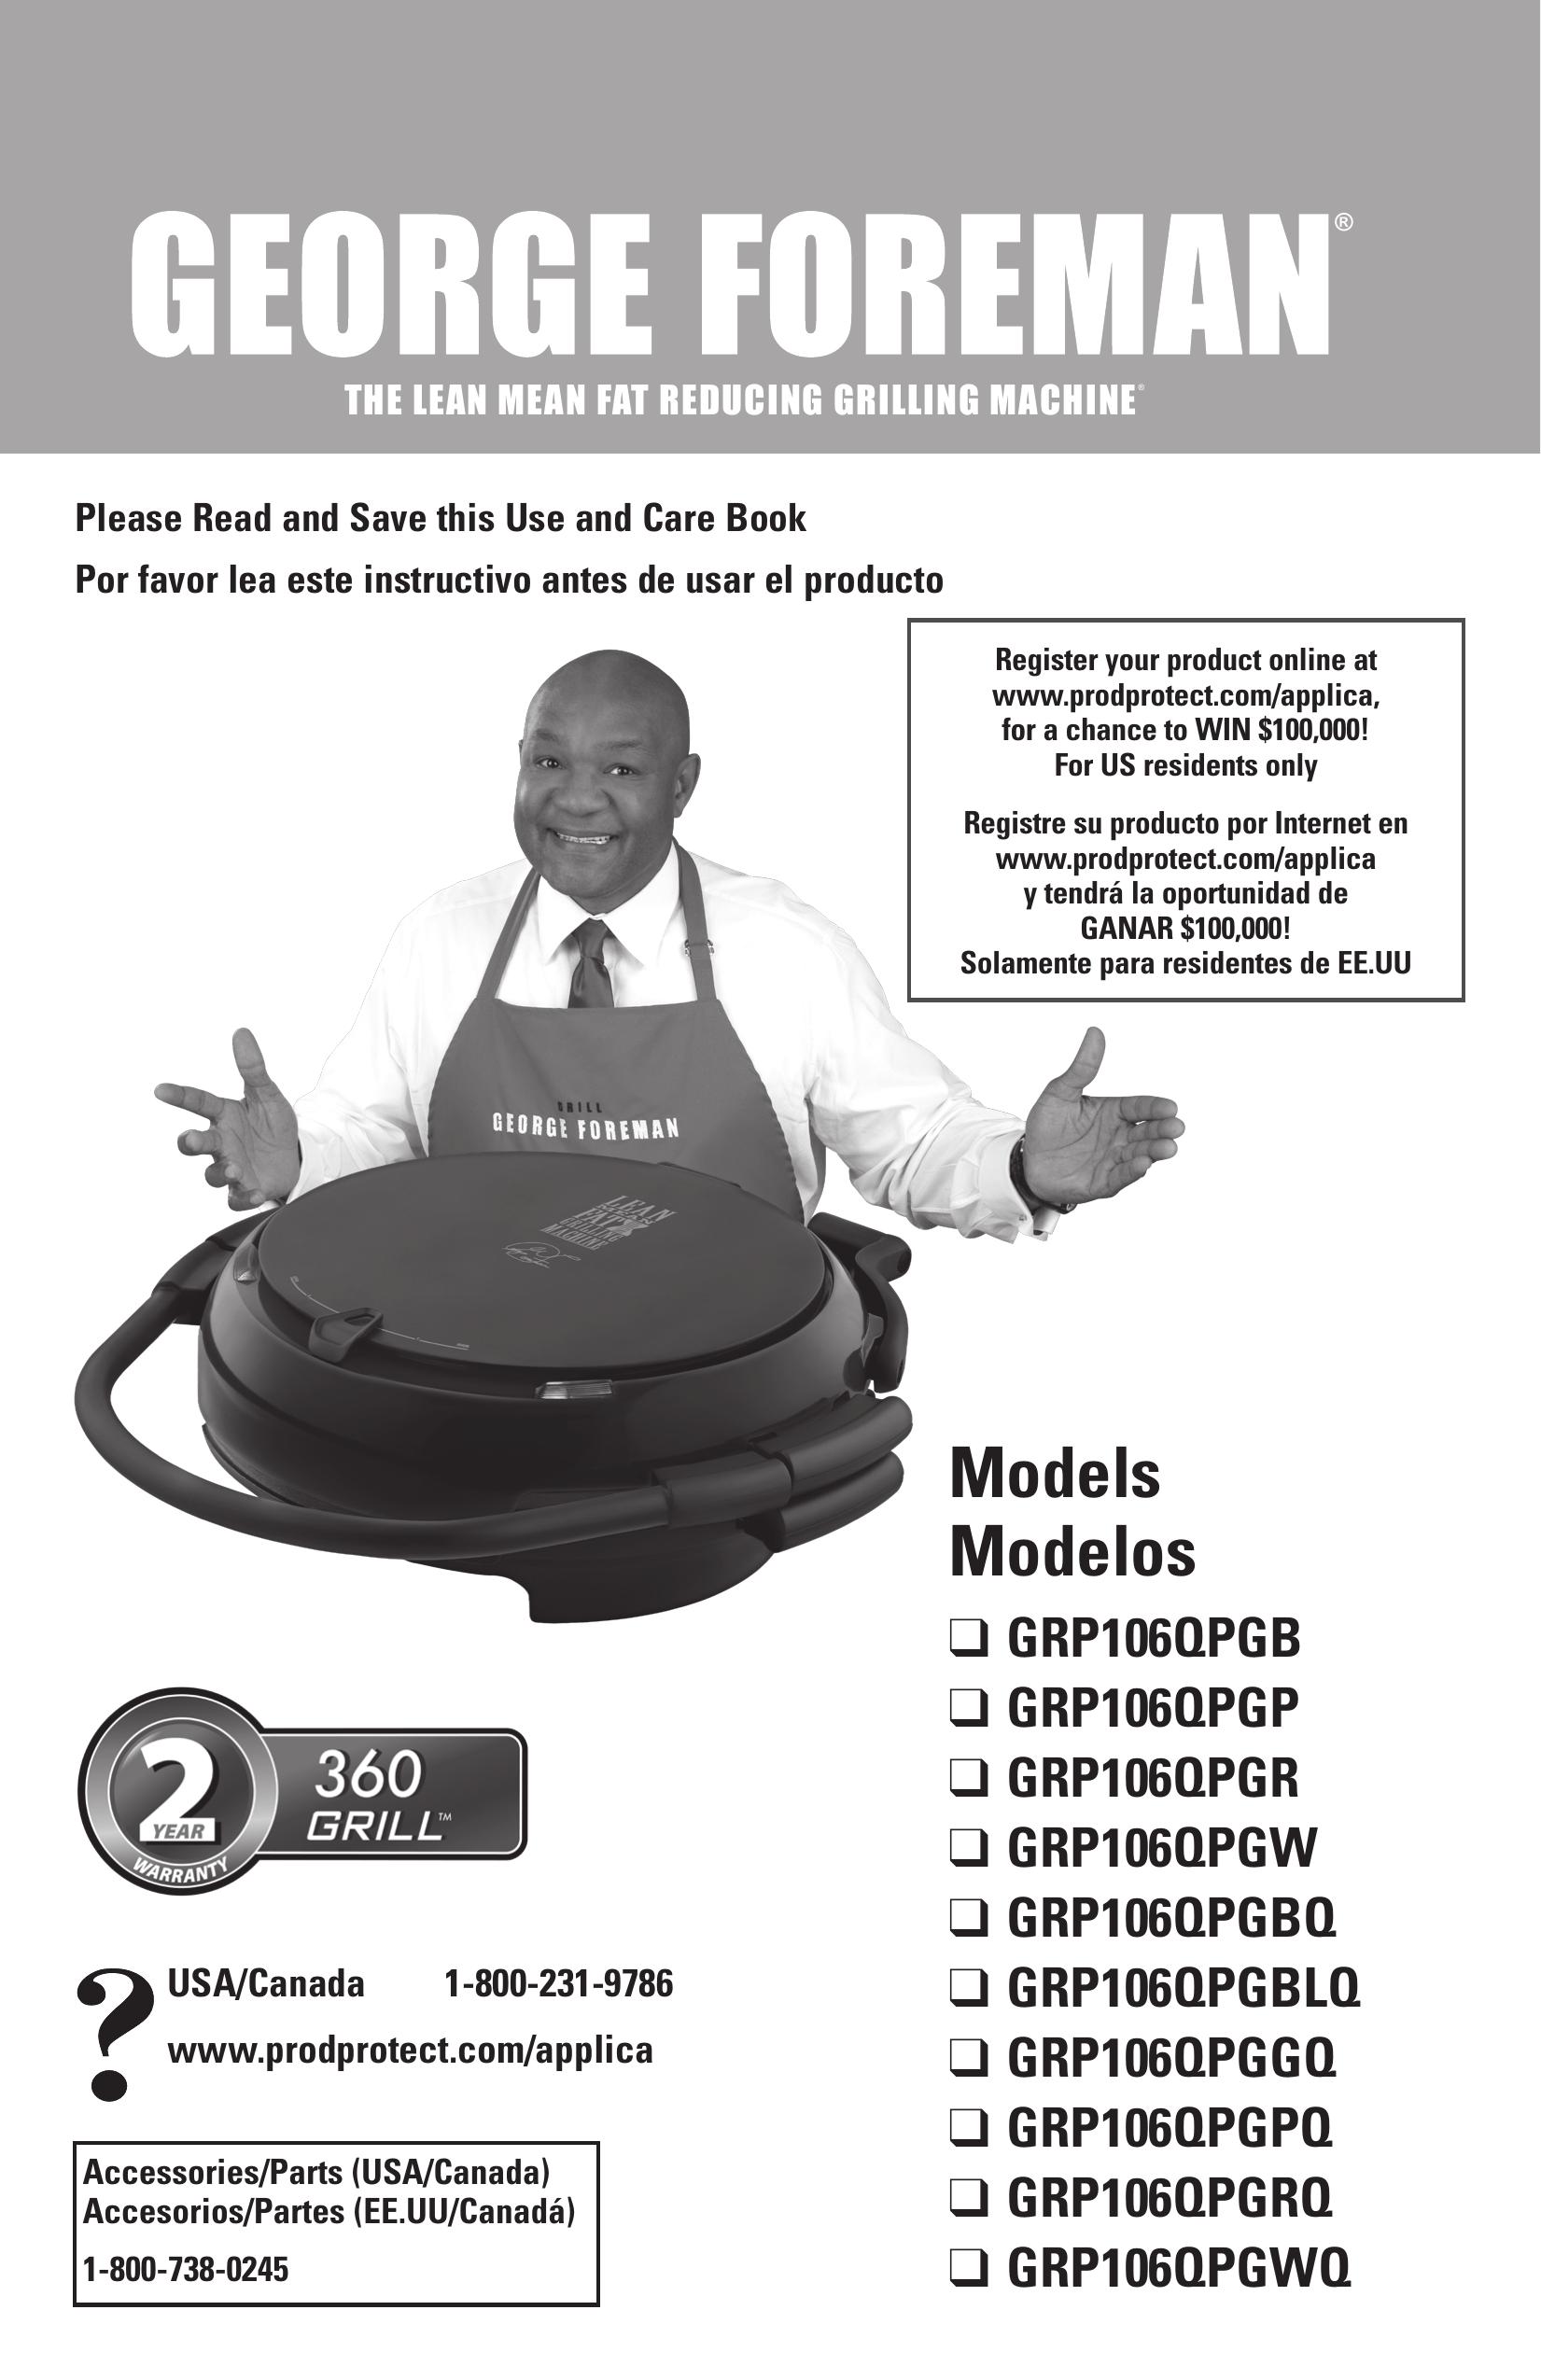 George Foreman GRP106QPGBLQ Electric Grill User Manual